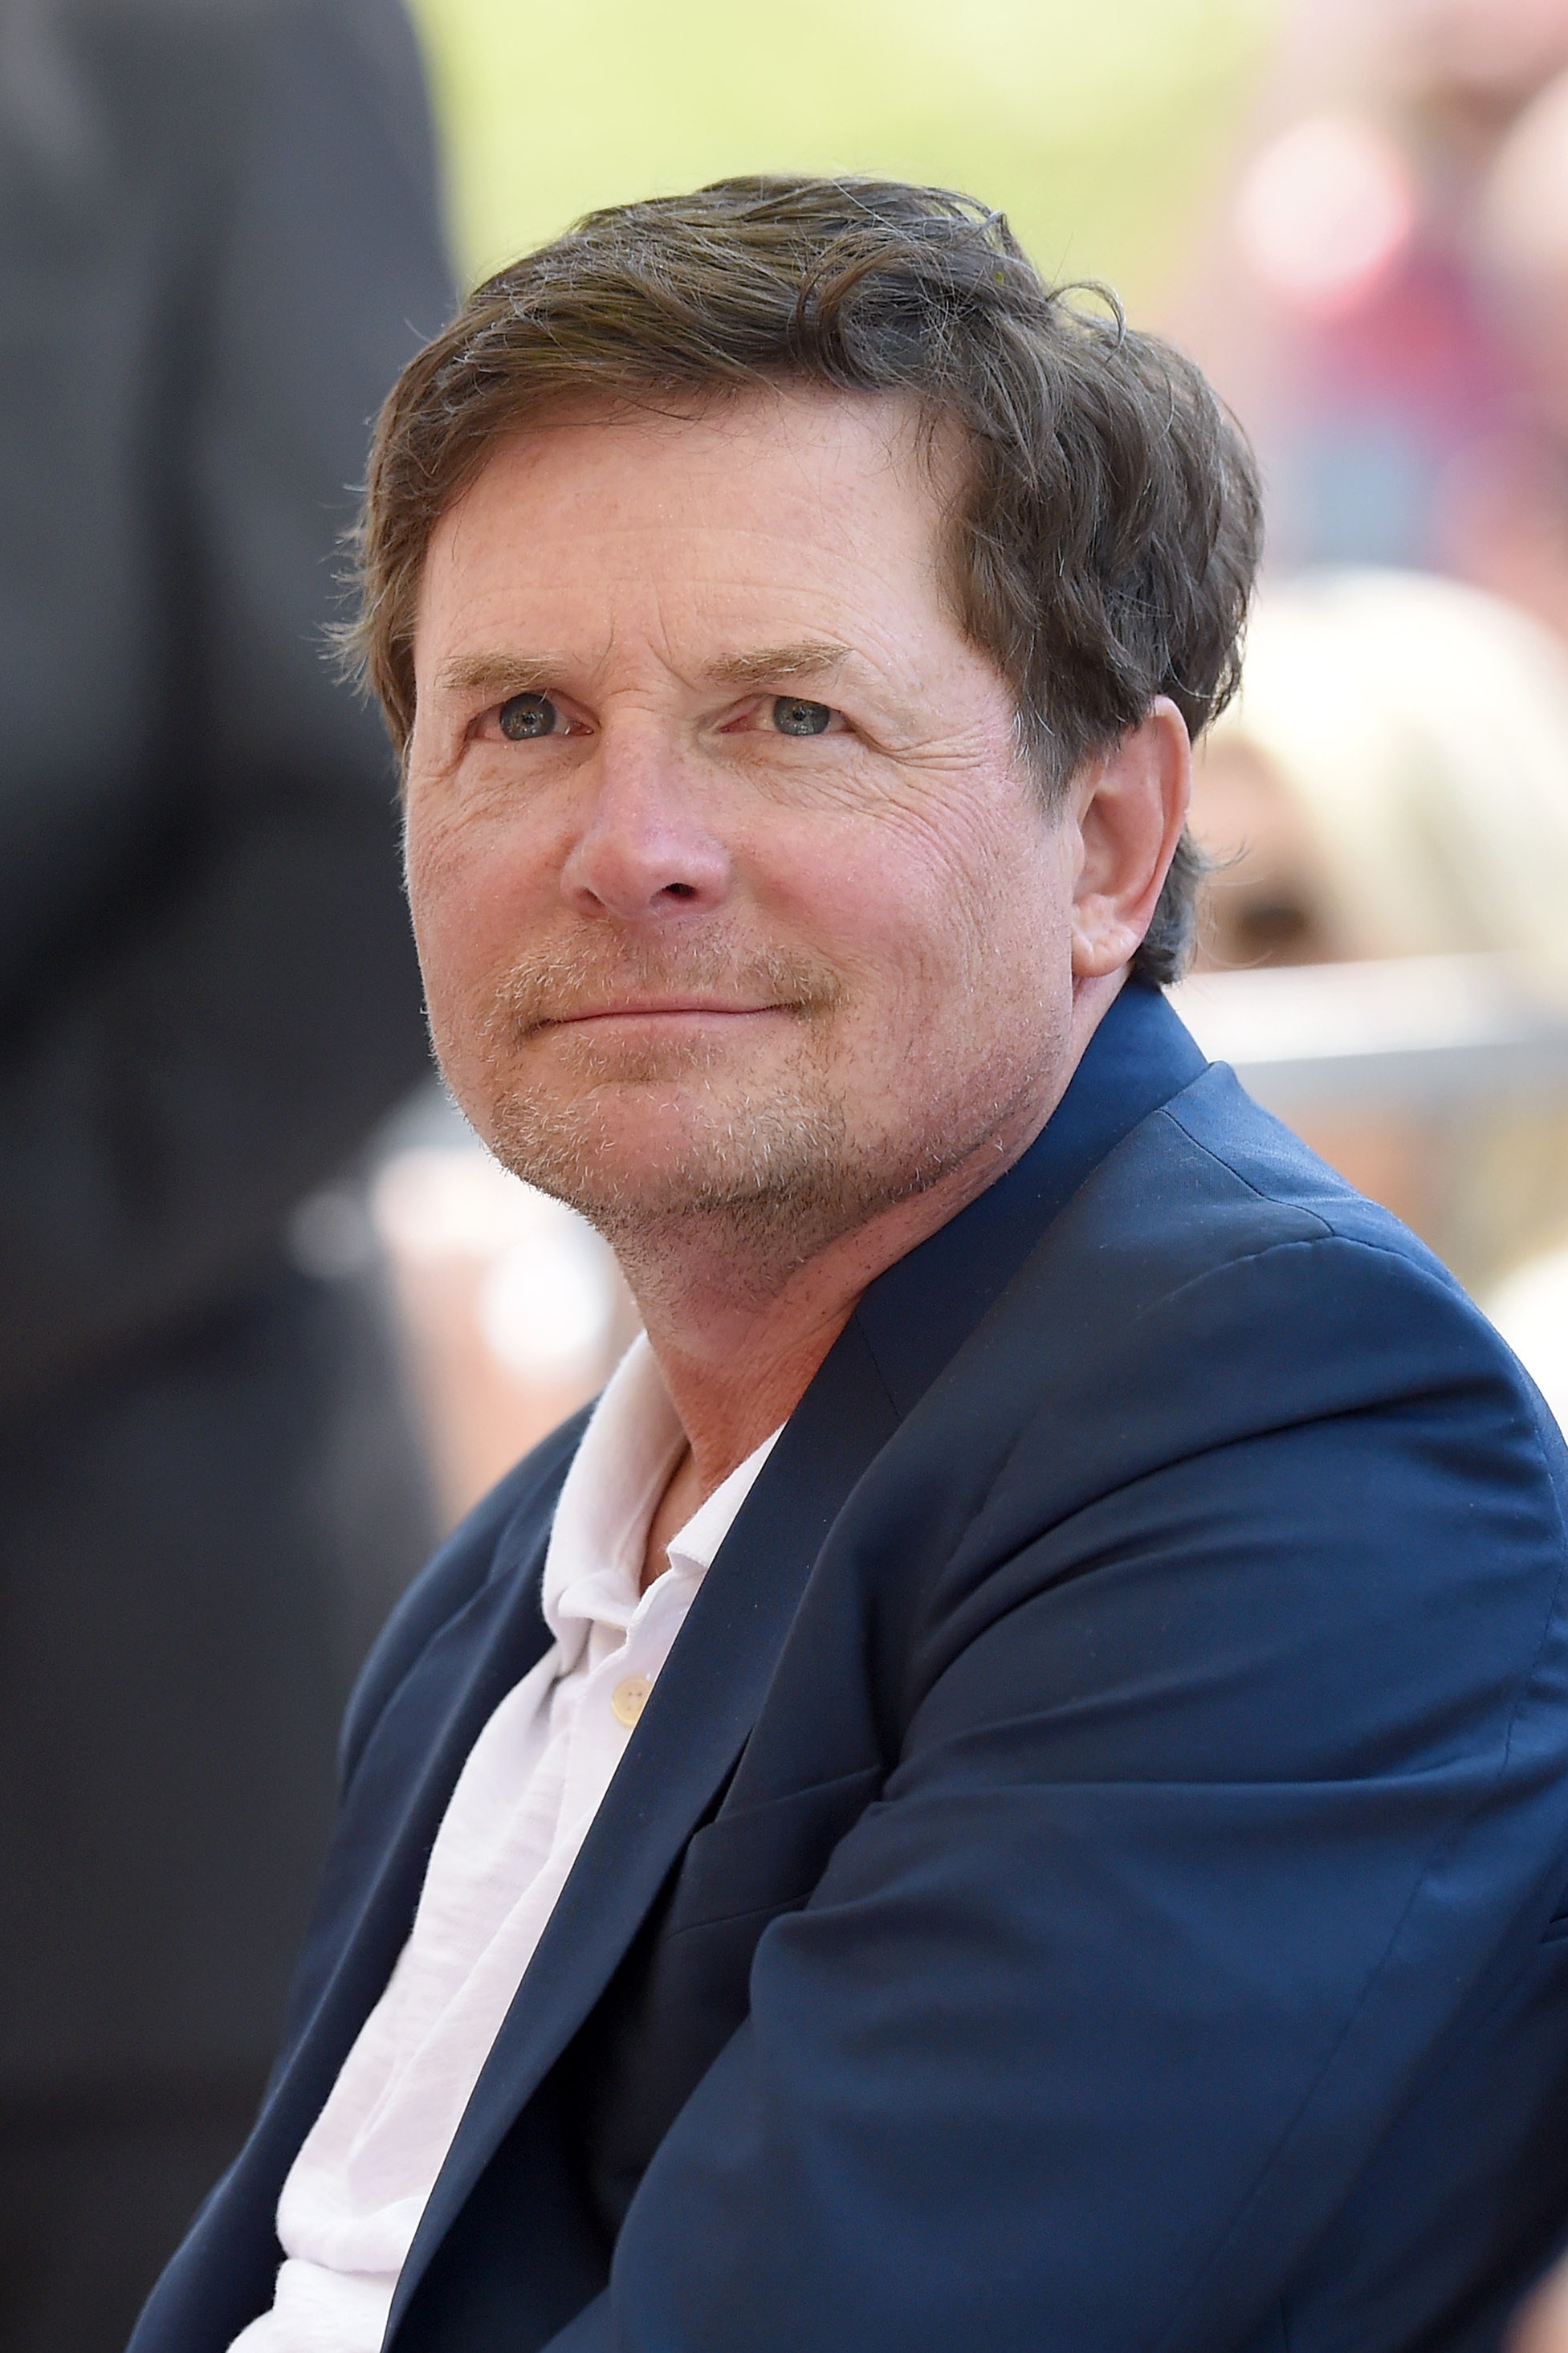 Michael J Fox Says Bullying From the Paparazzi Is Why He Publicly